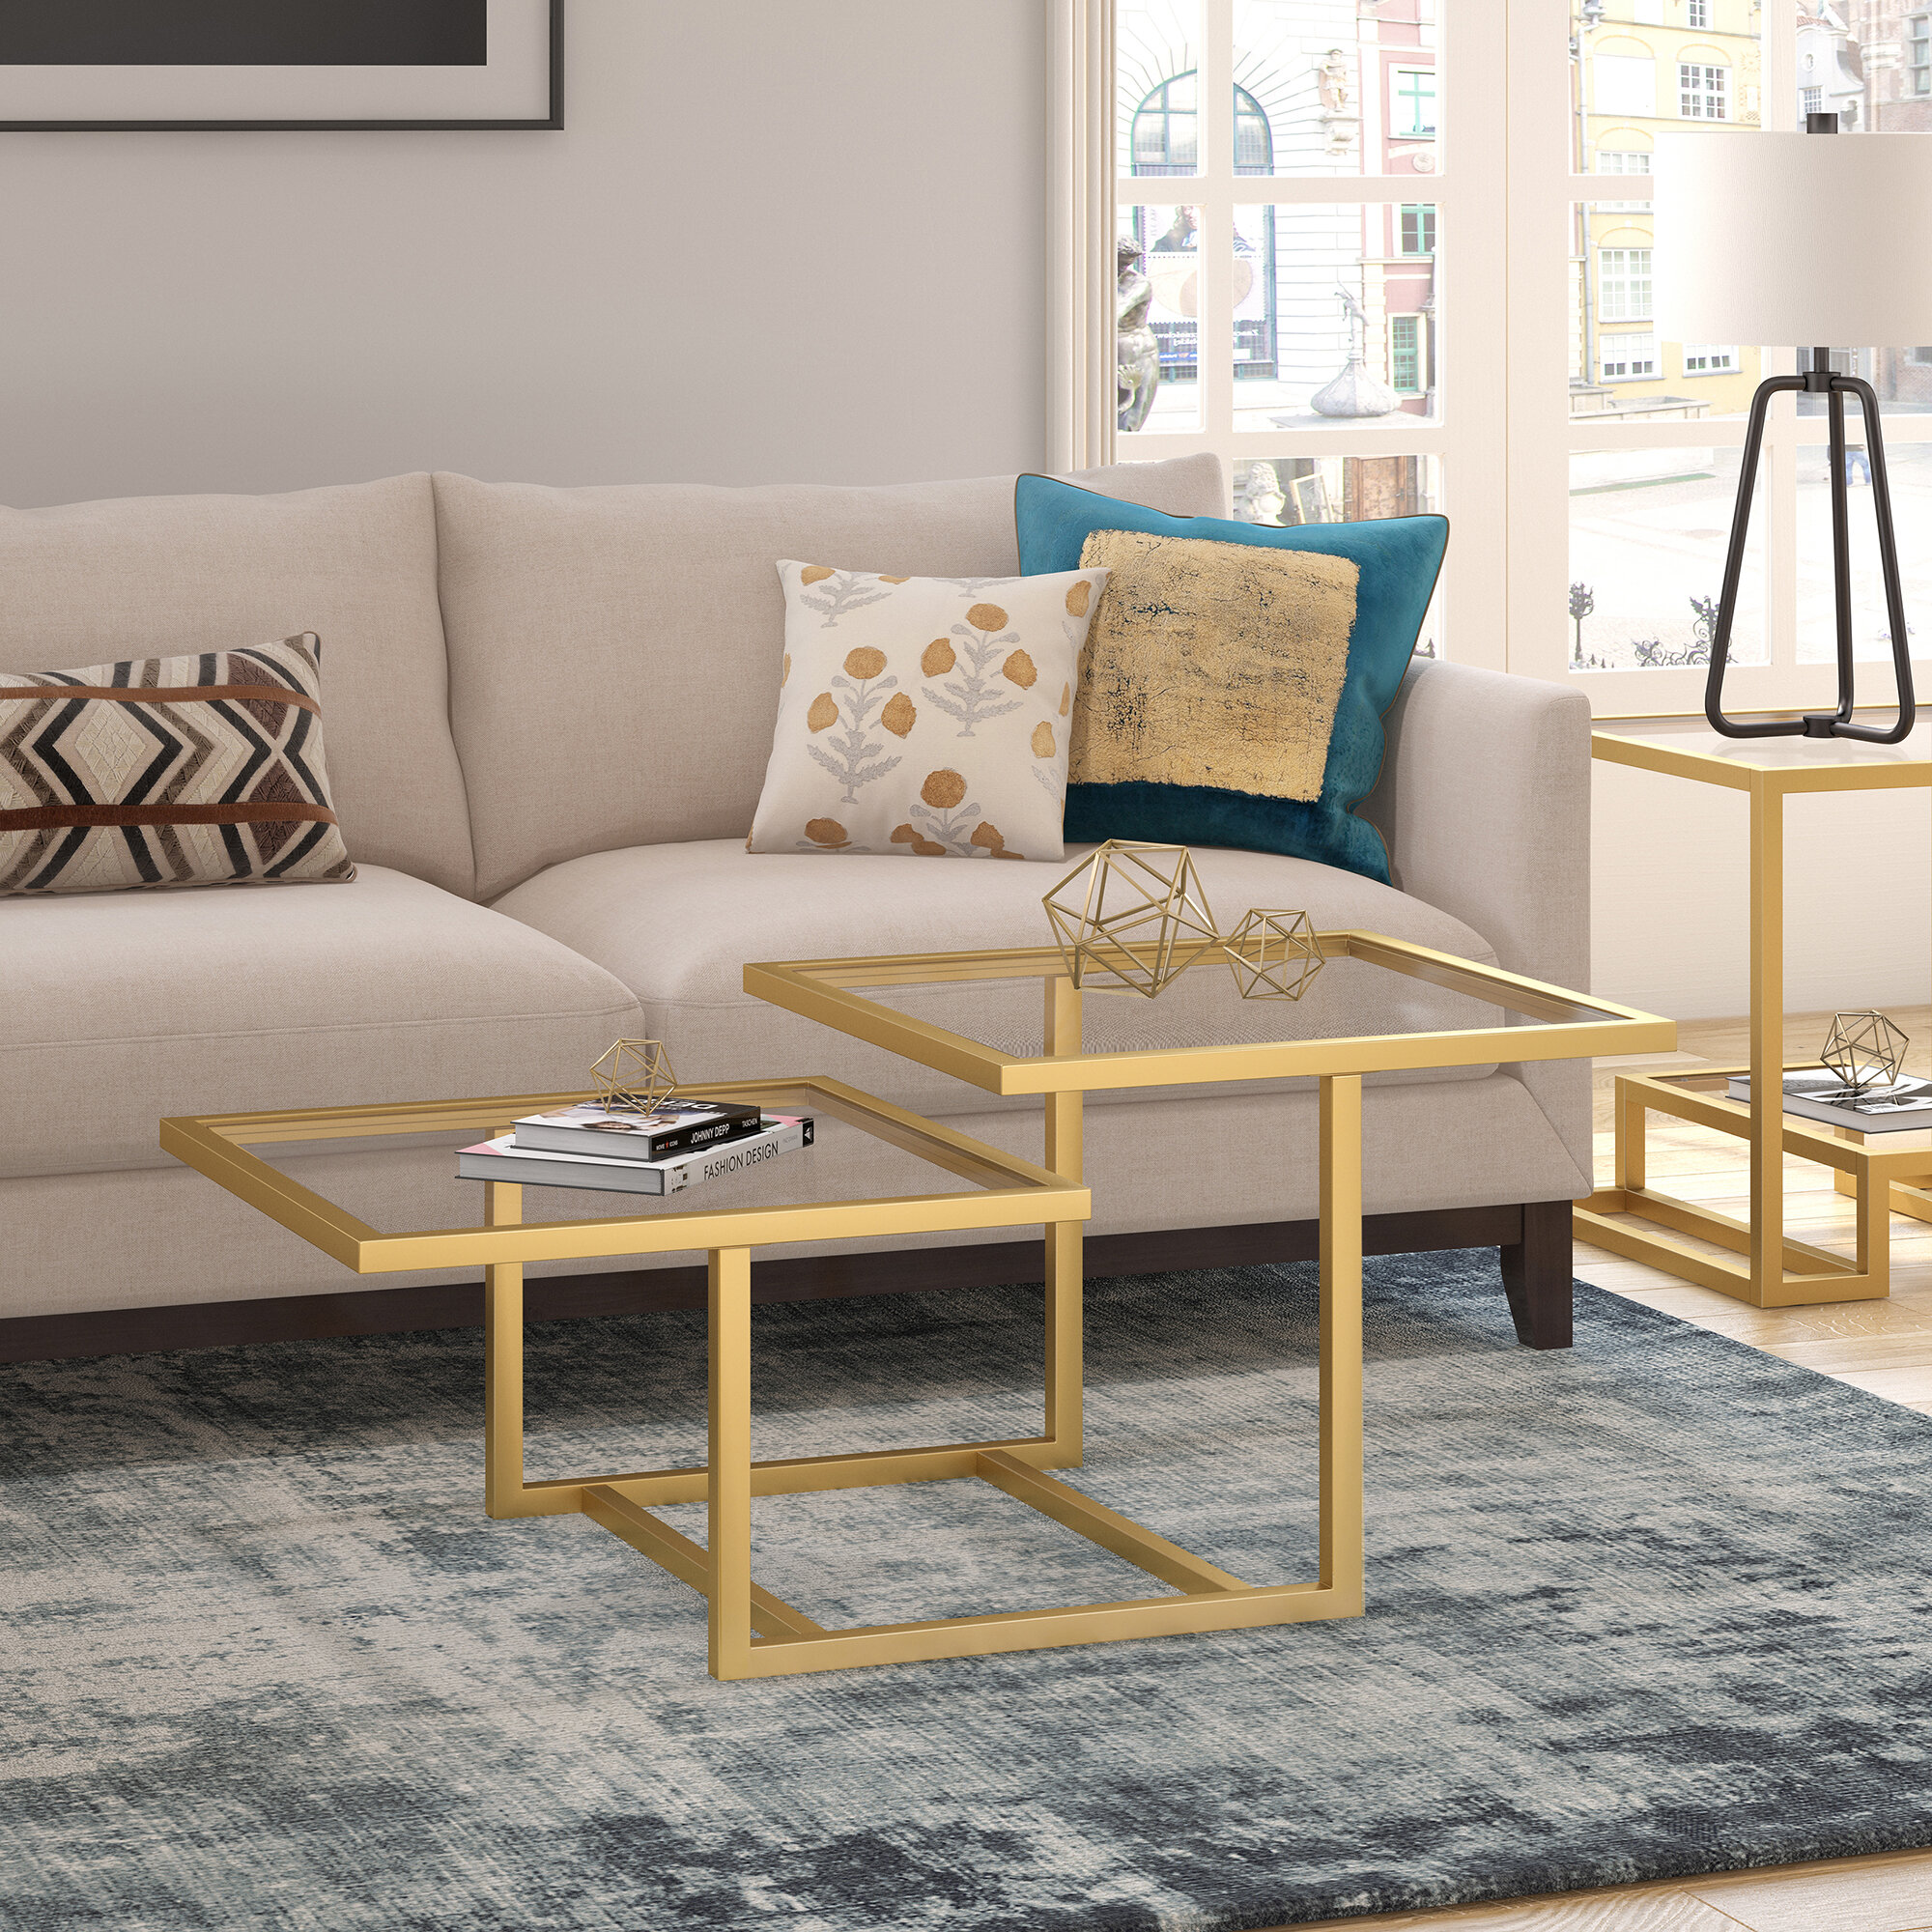 Wayfair | Gold Coffee Table Sets You'll Love in 2022